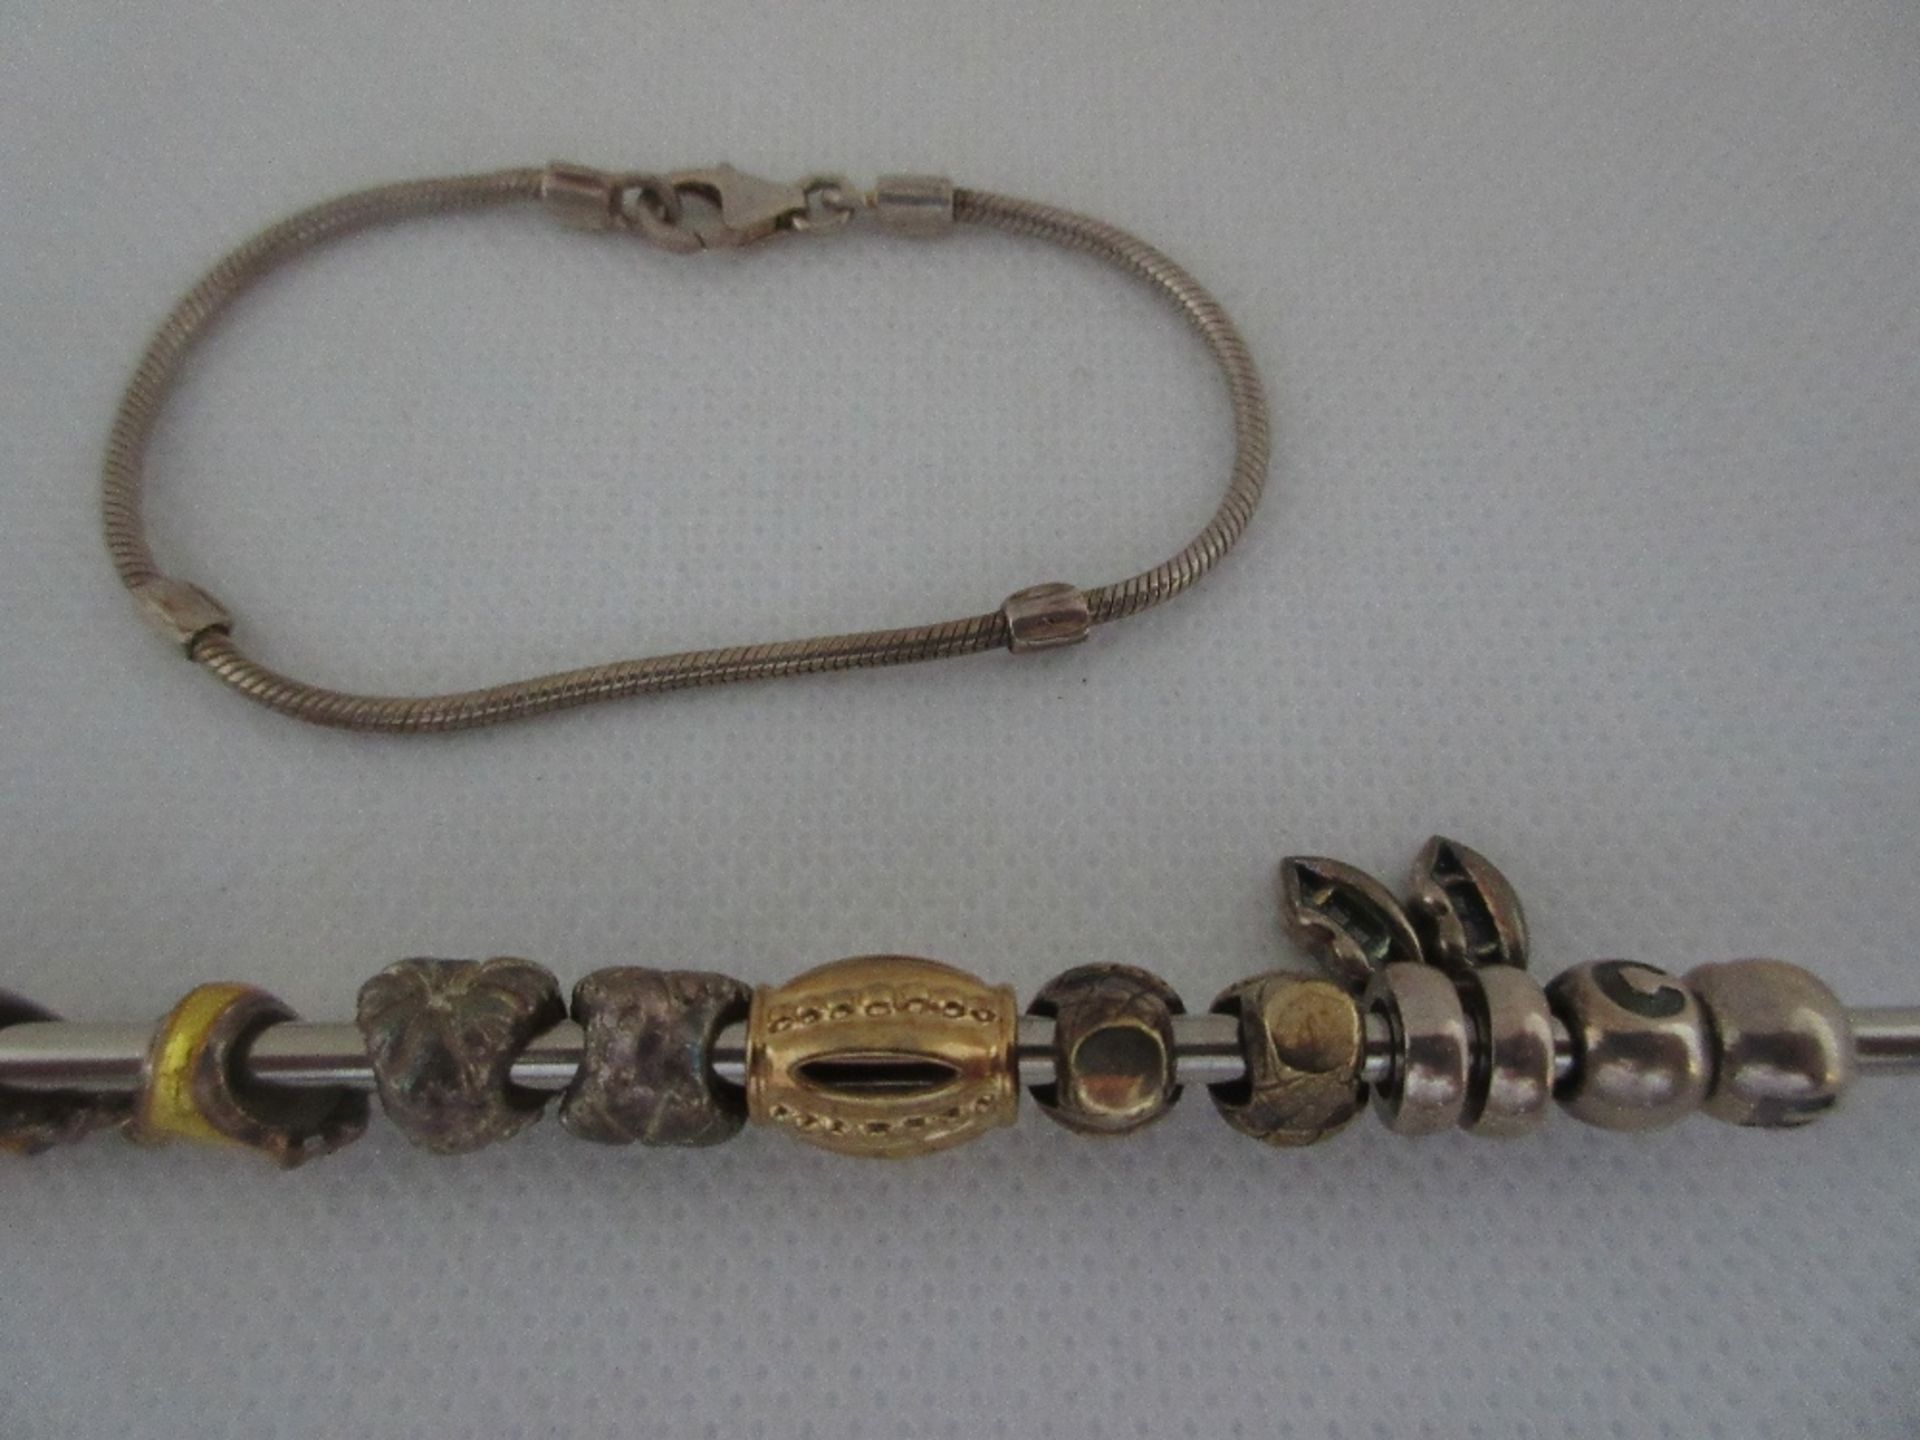 AAGGARD - CHARM BRACELET AND 16 CHARMS - Image 3 of 3